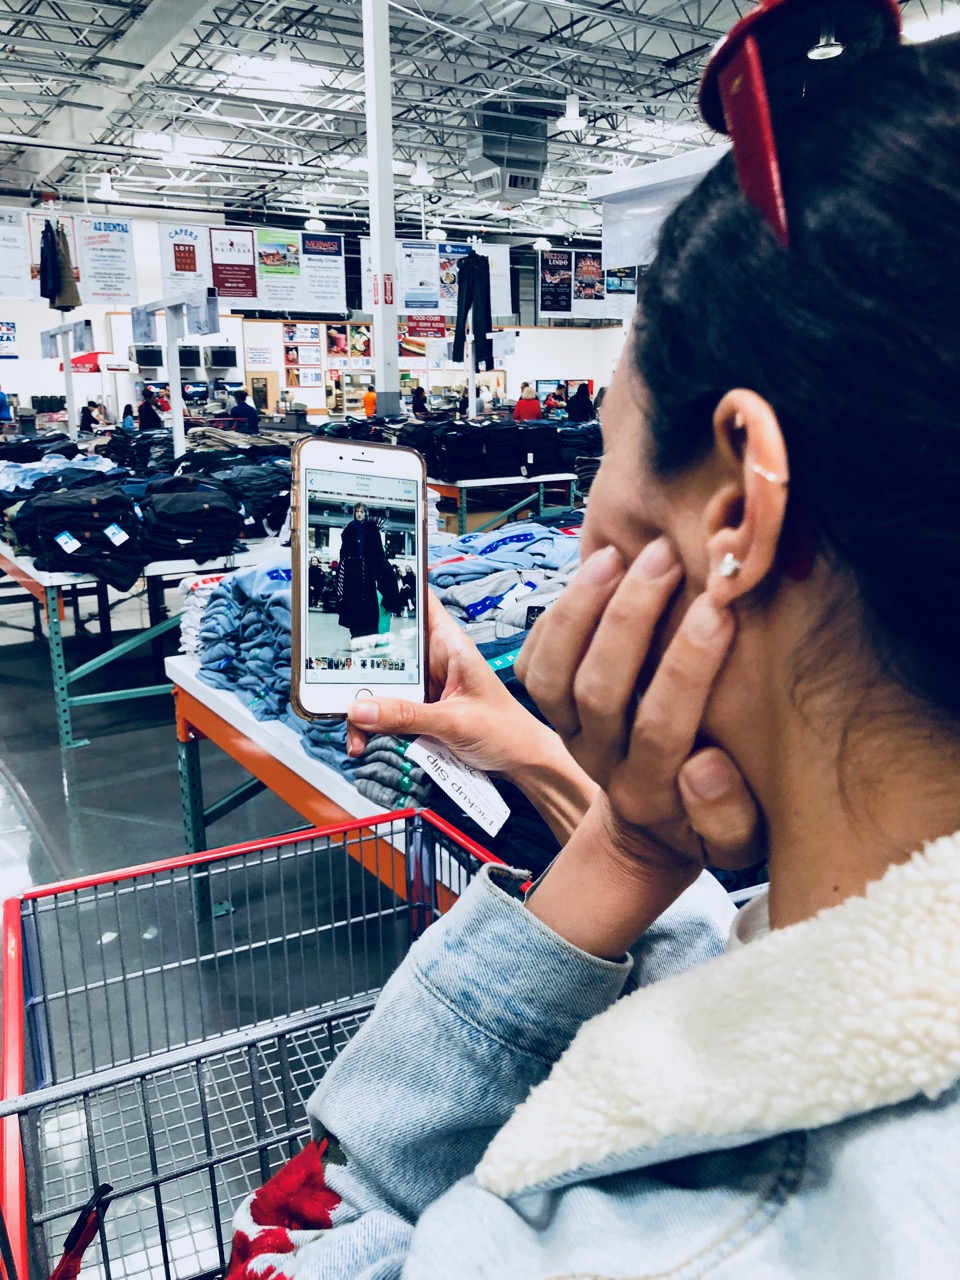 how to get the vetements look at Costco